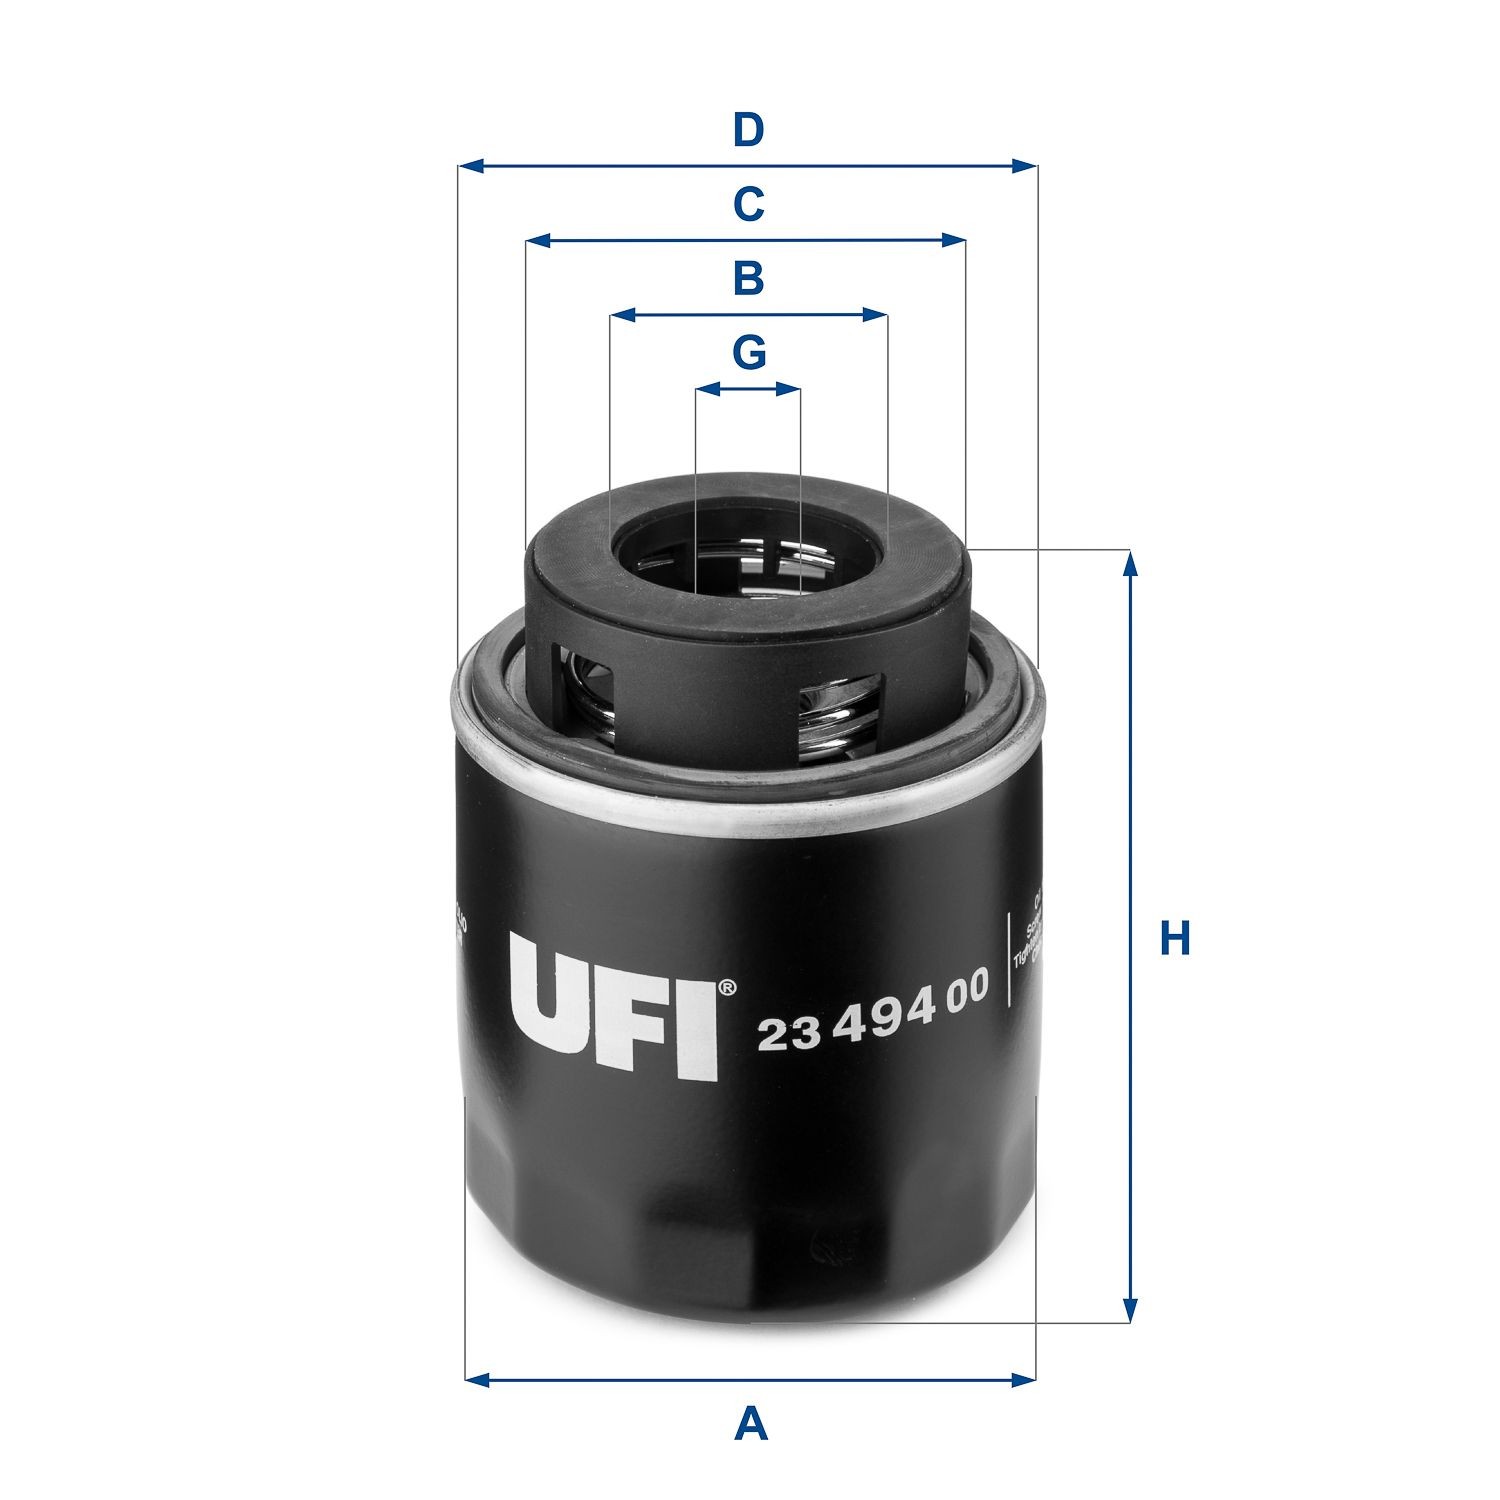 UFI 23.494.00 Oil filter 3/4-16 UNF, with two anti-return valves, Spin-on Filter